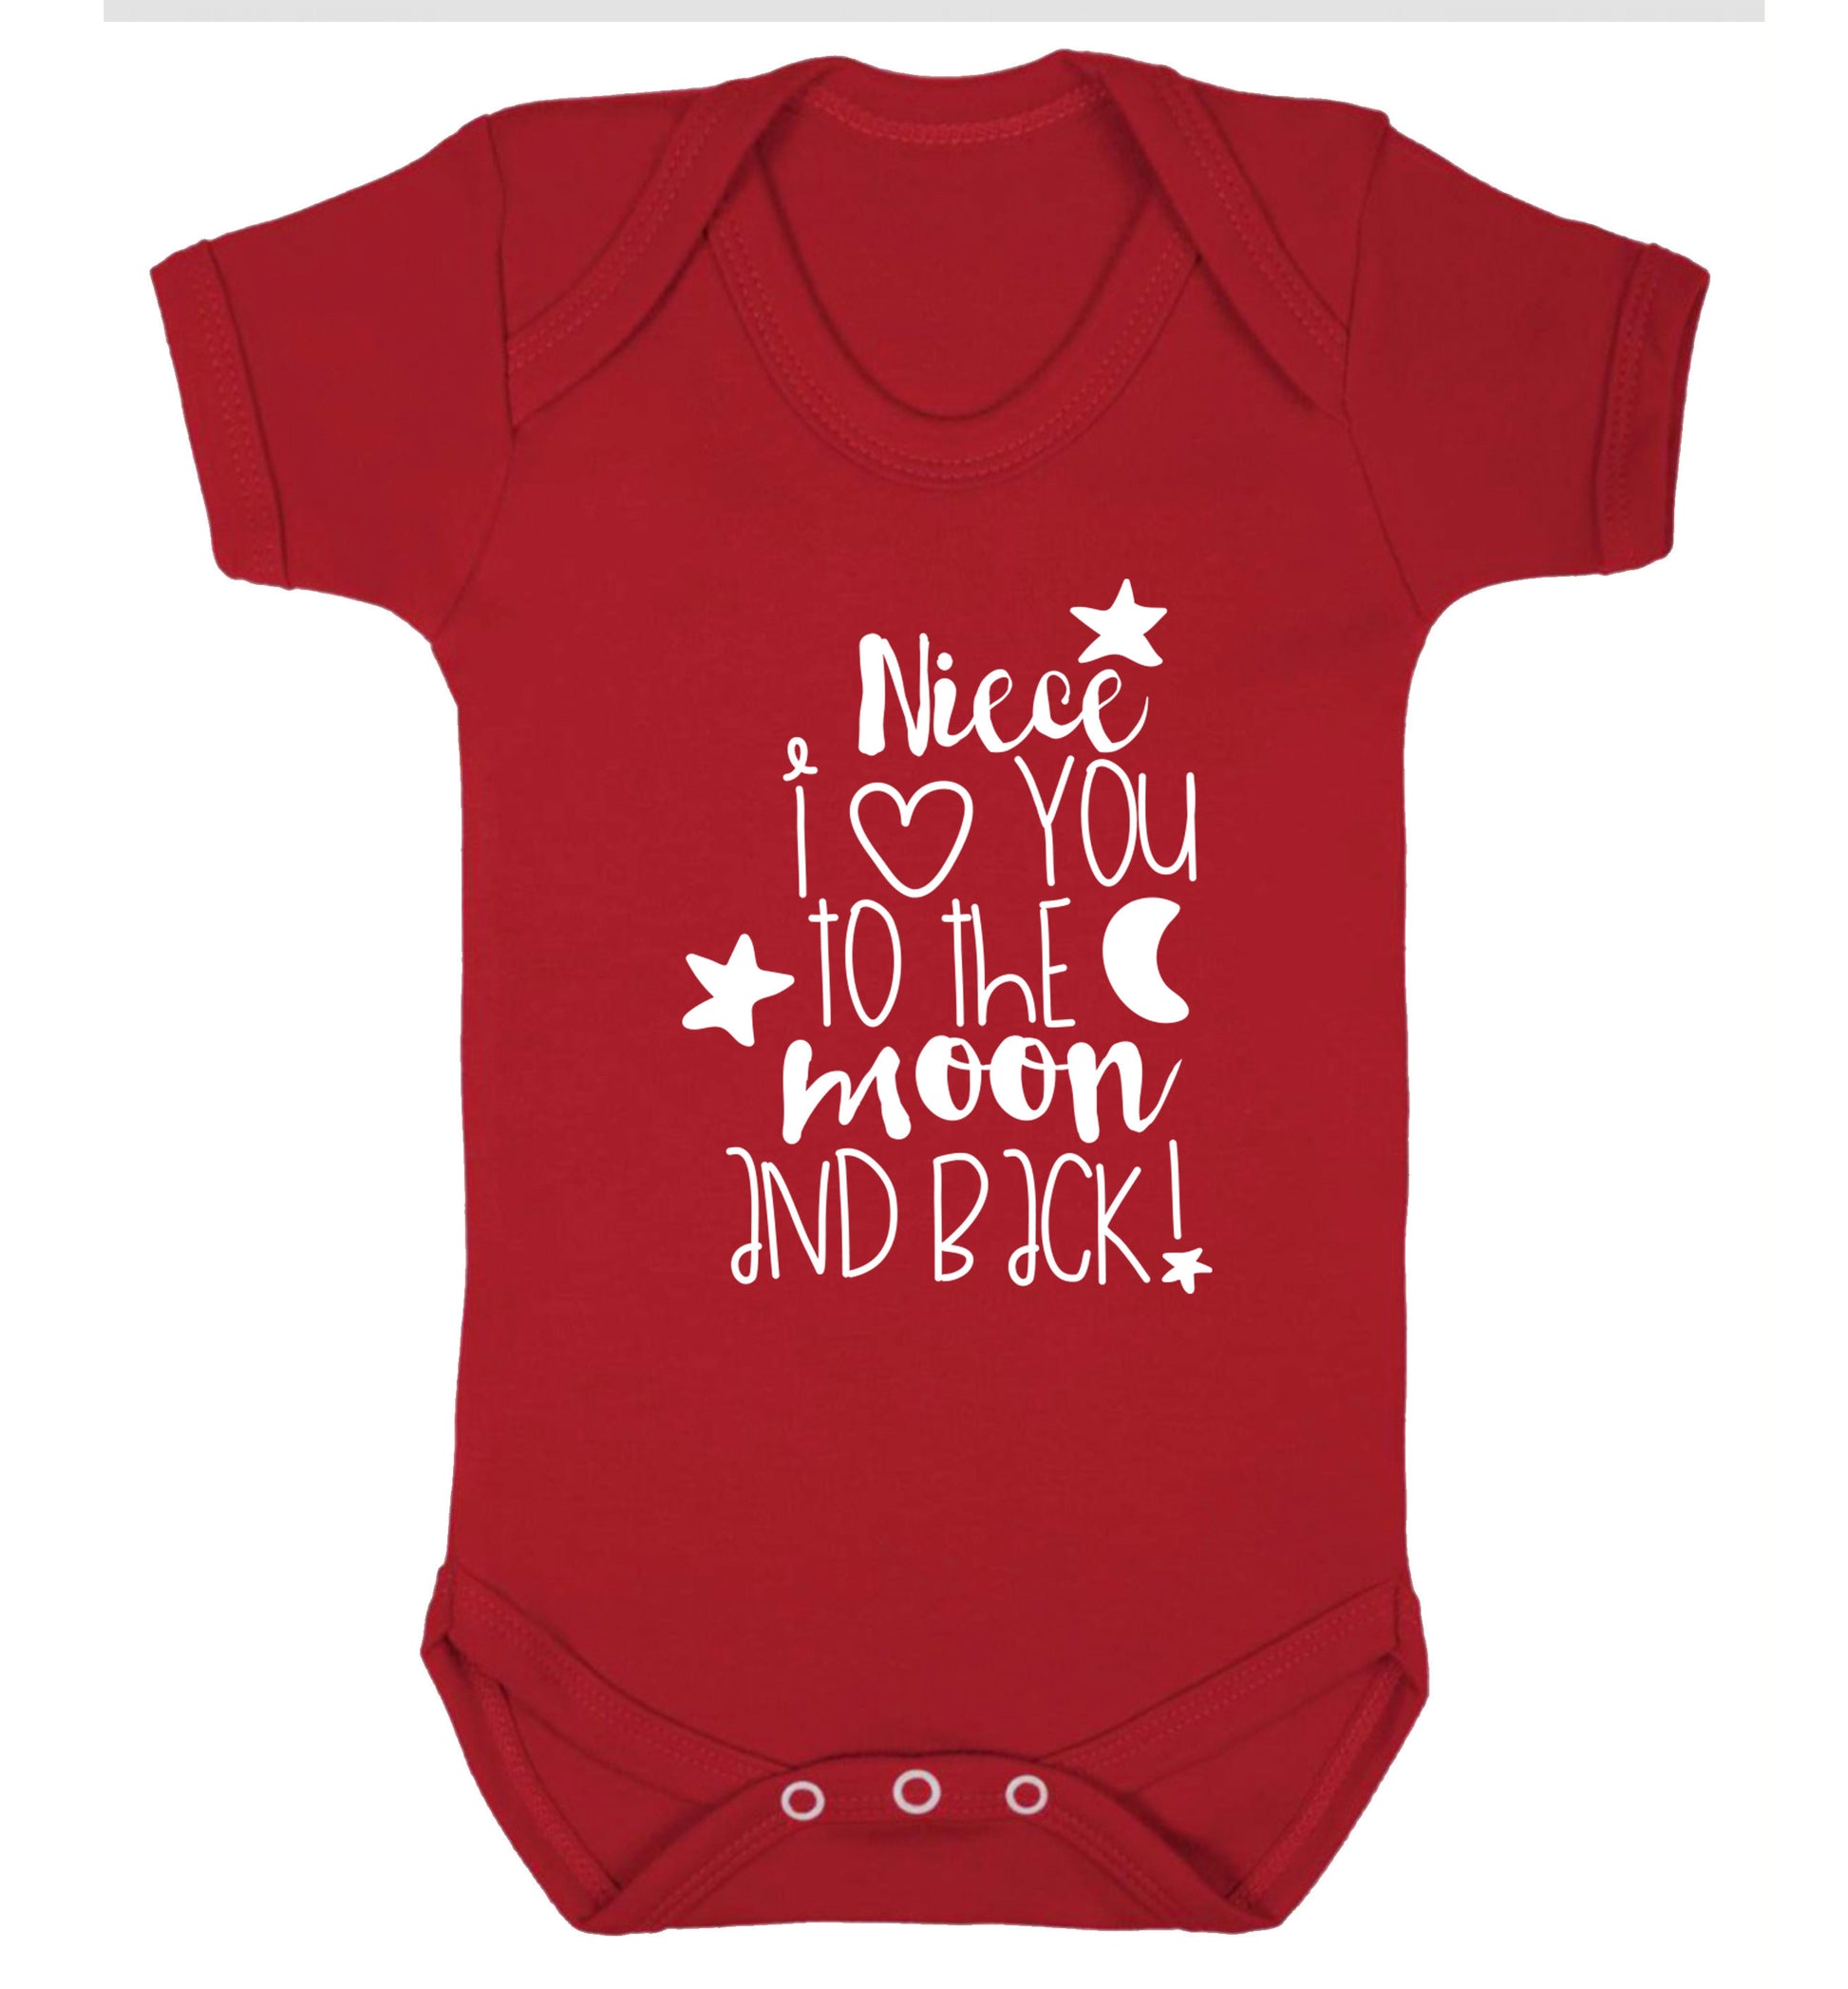 Niece I love you to the moon and back Baby Vest red 18-24 months